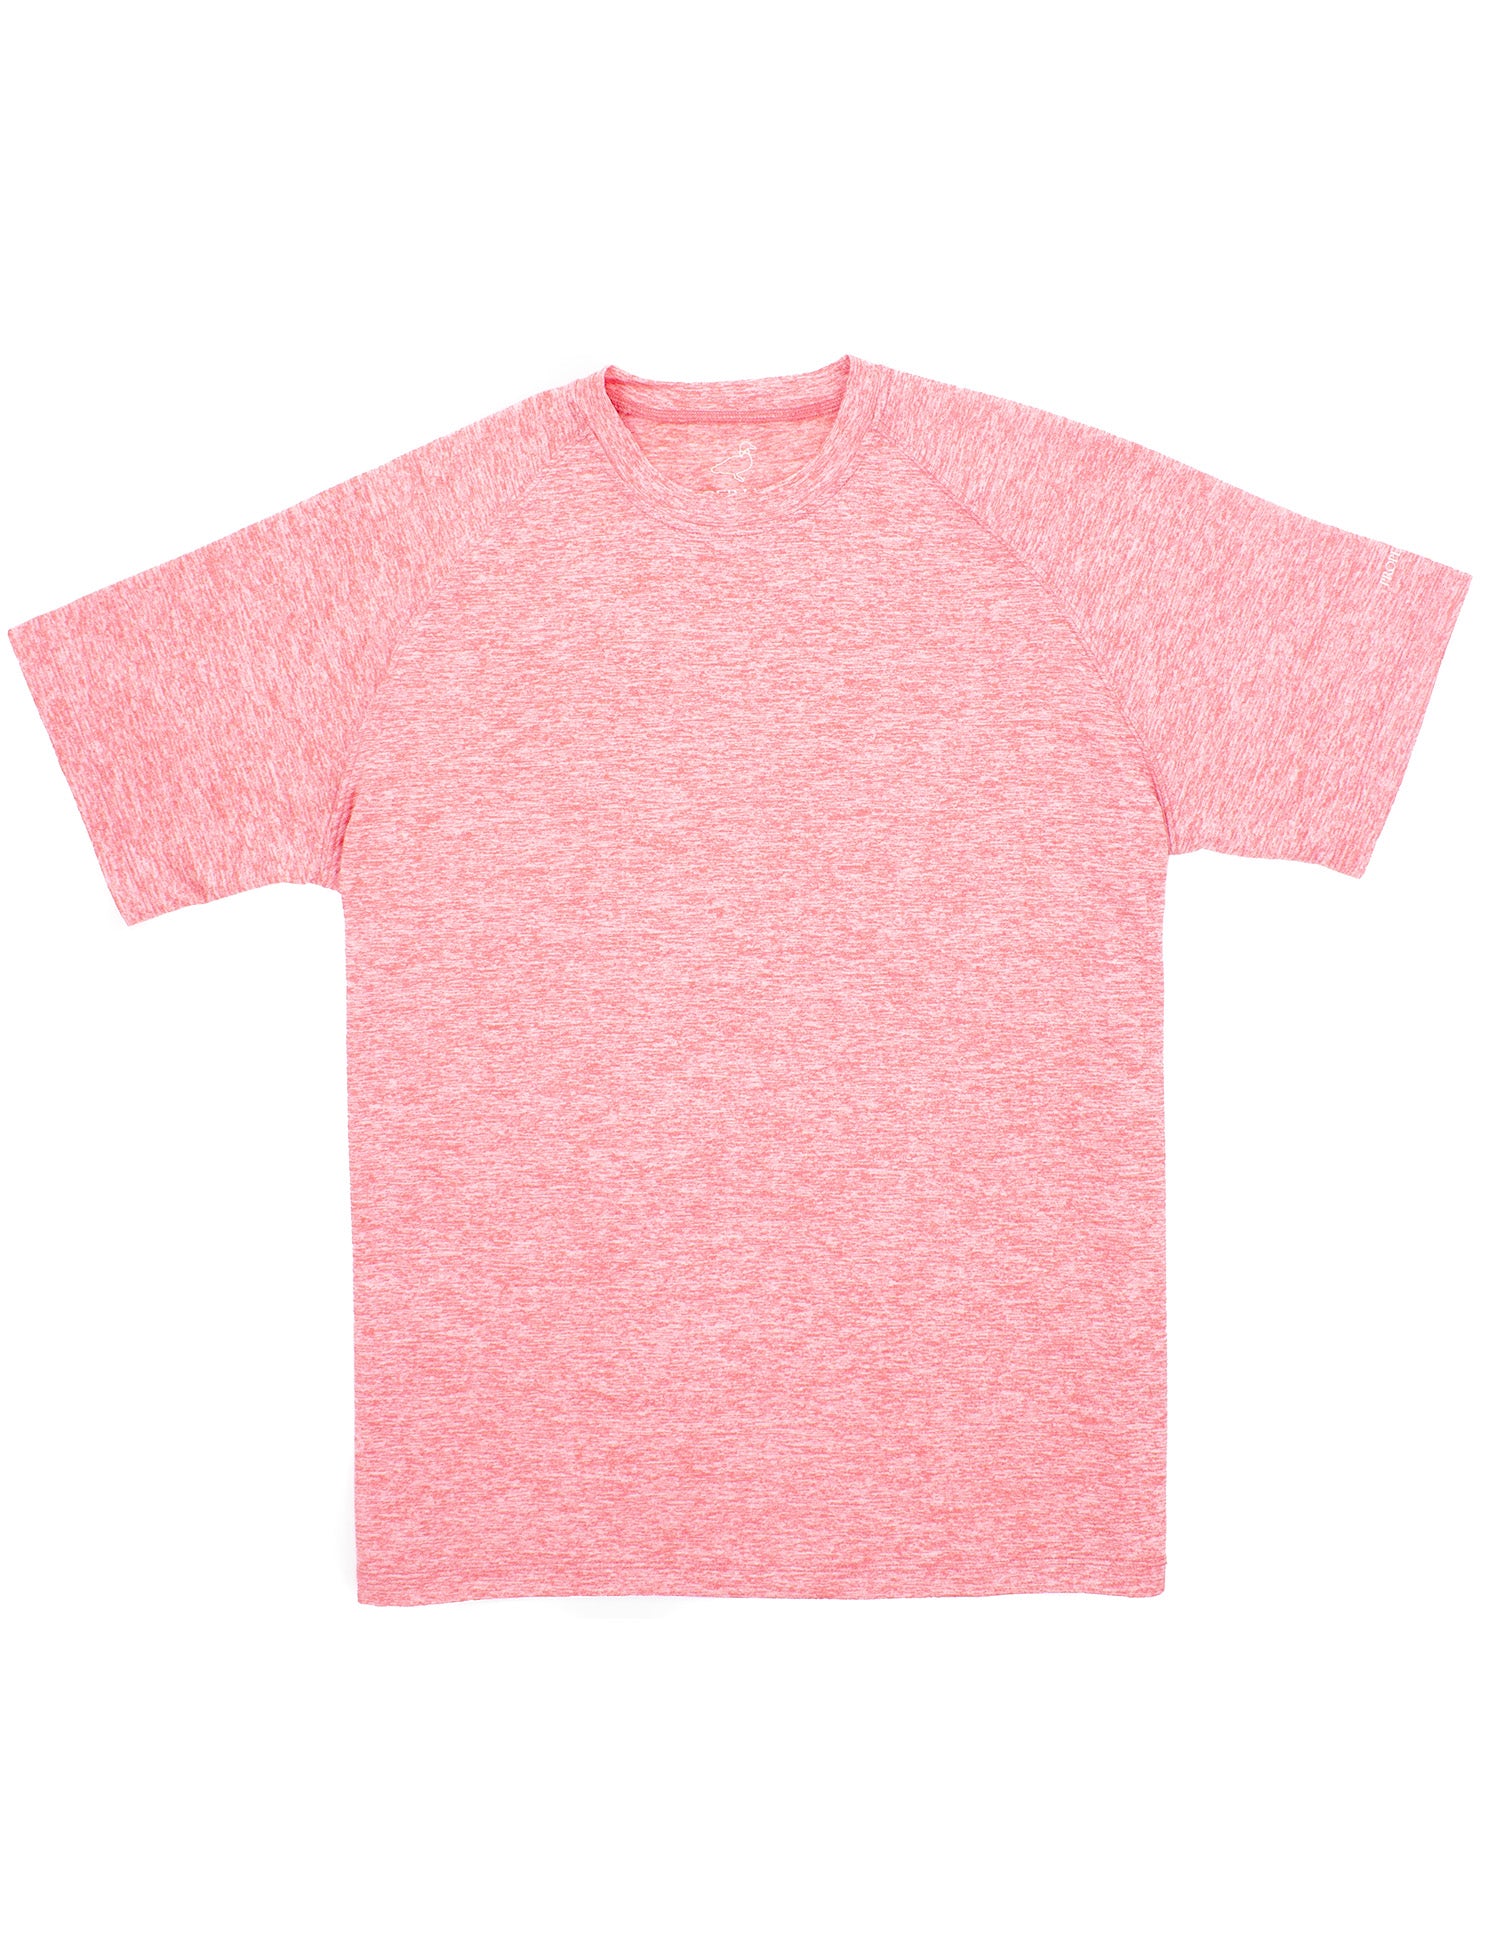 Flash Tee SS Coral Eclipse